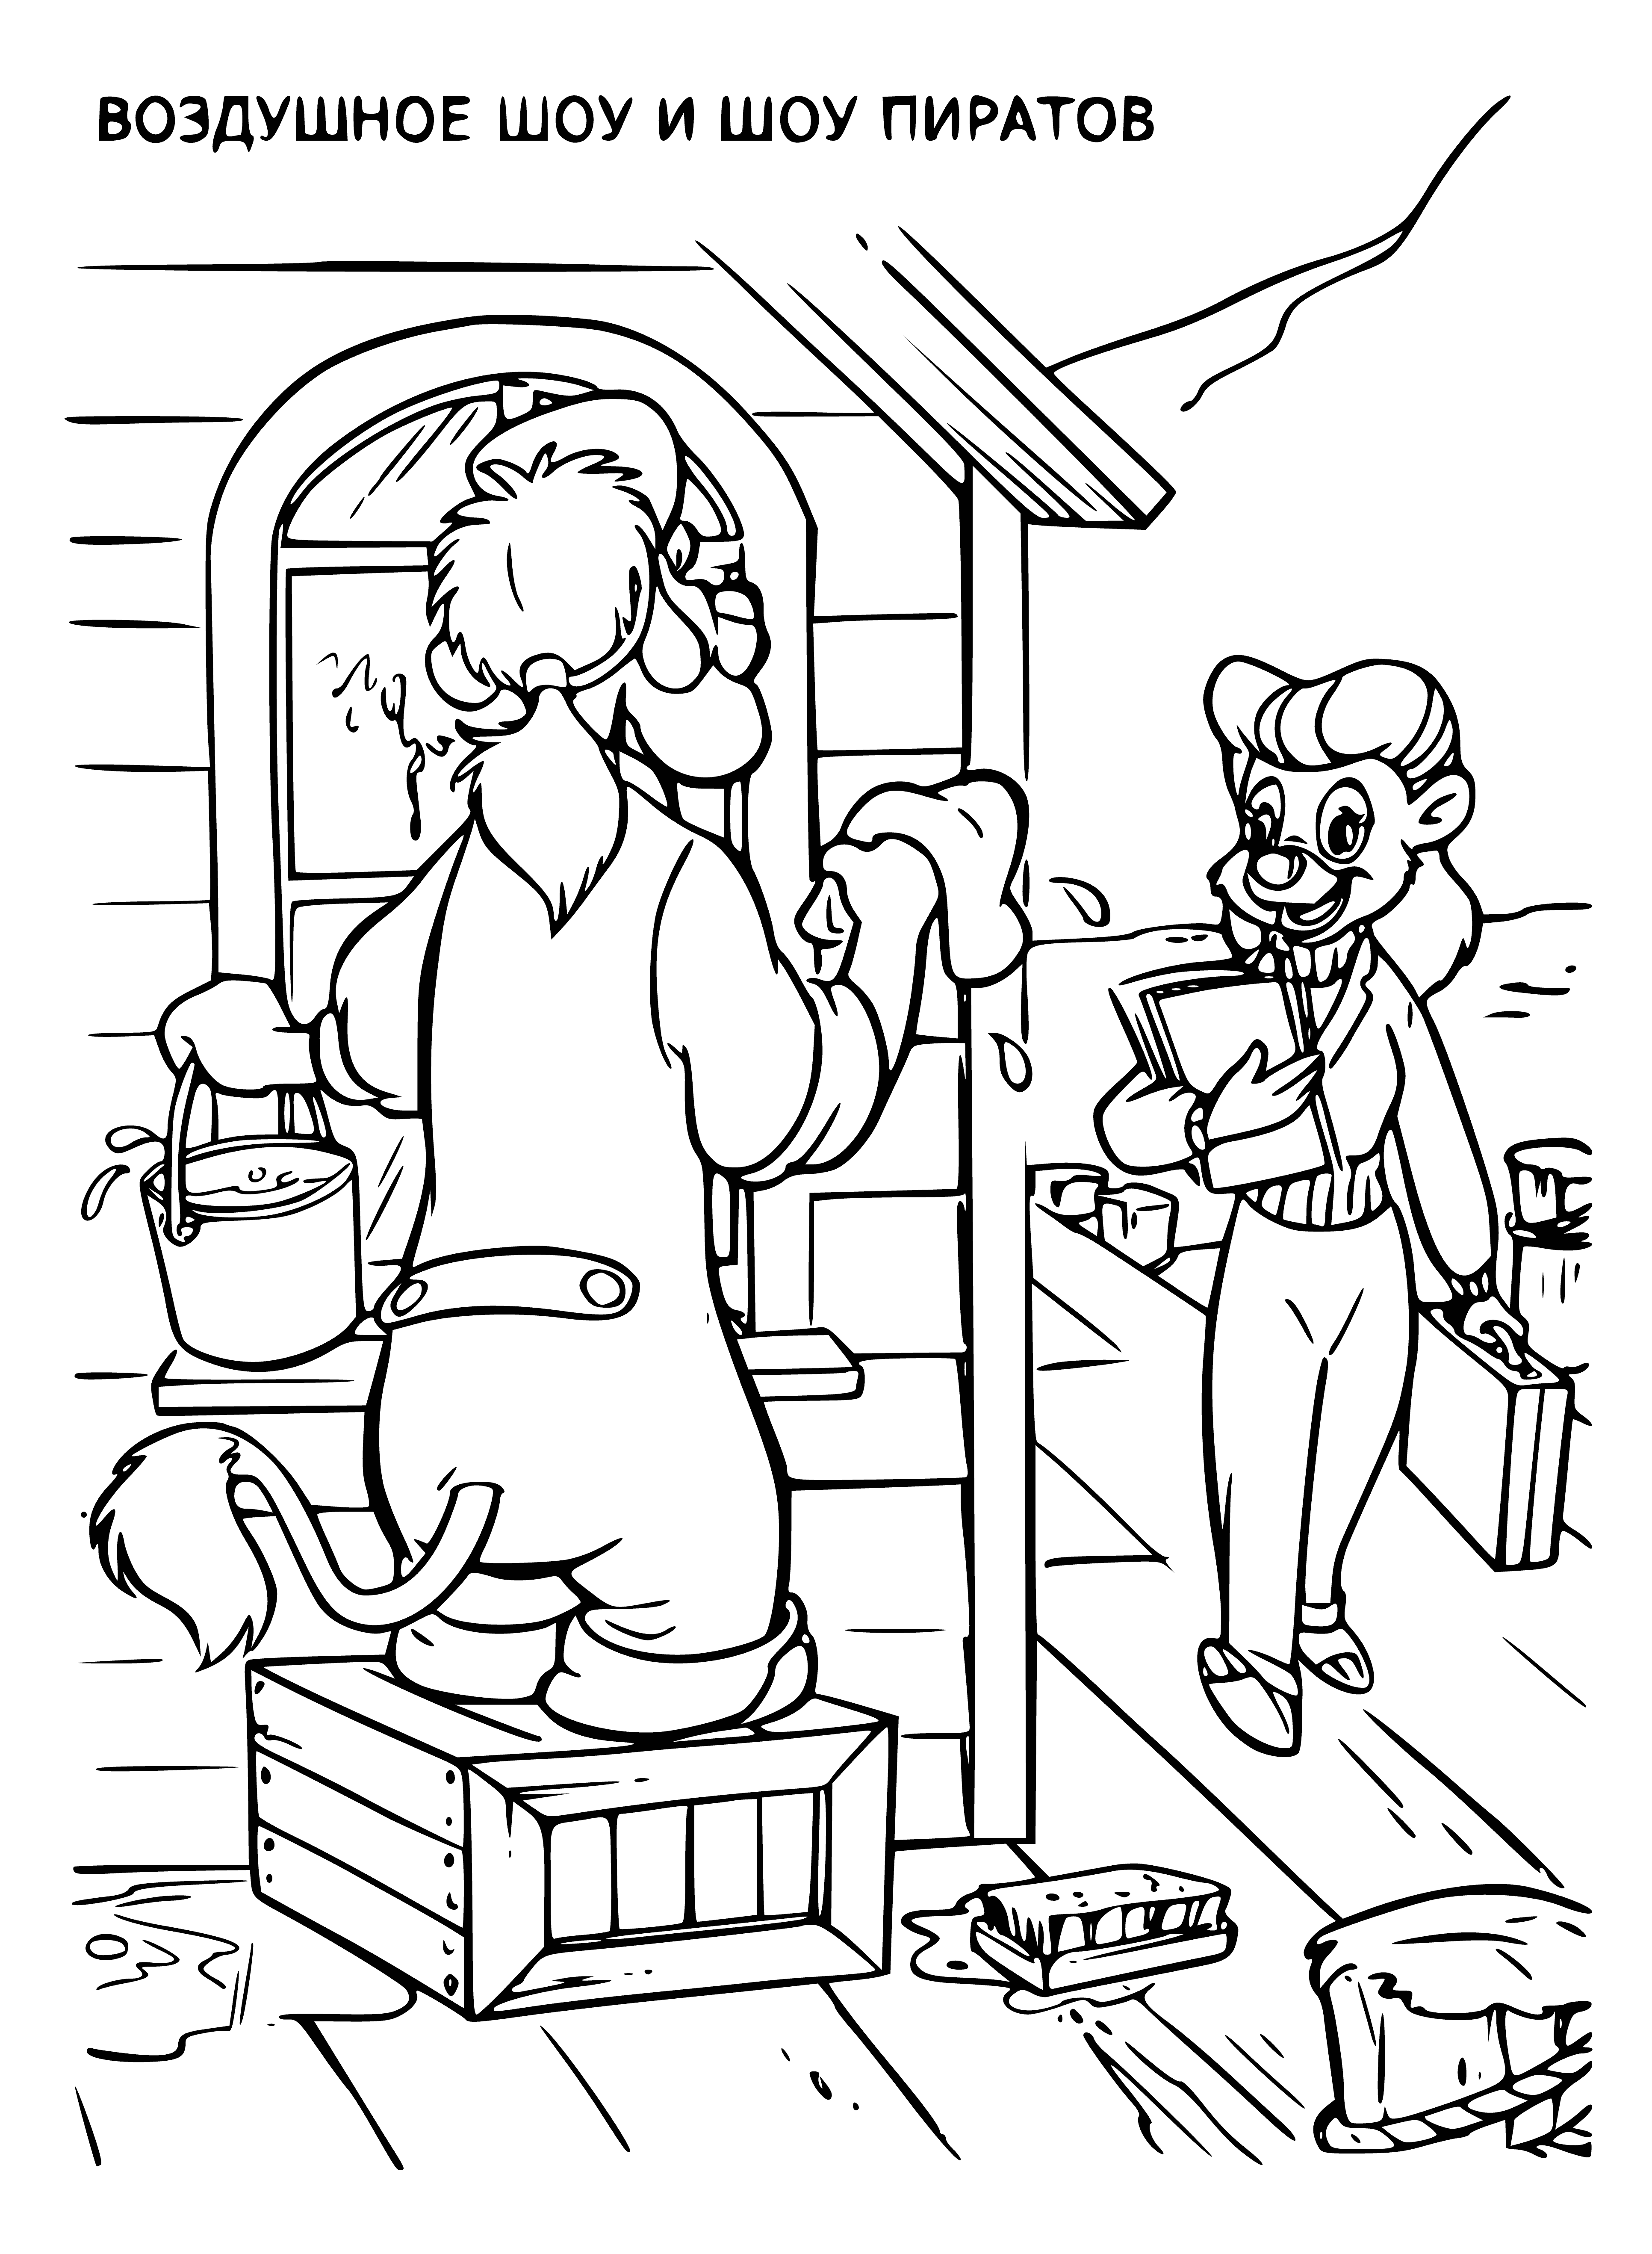 coloring page: Pirates search for prey with a telescope & chat with parrot, while their ship The Black Pearl awaits orders.